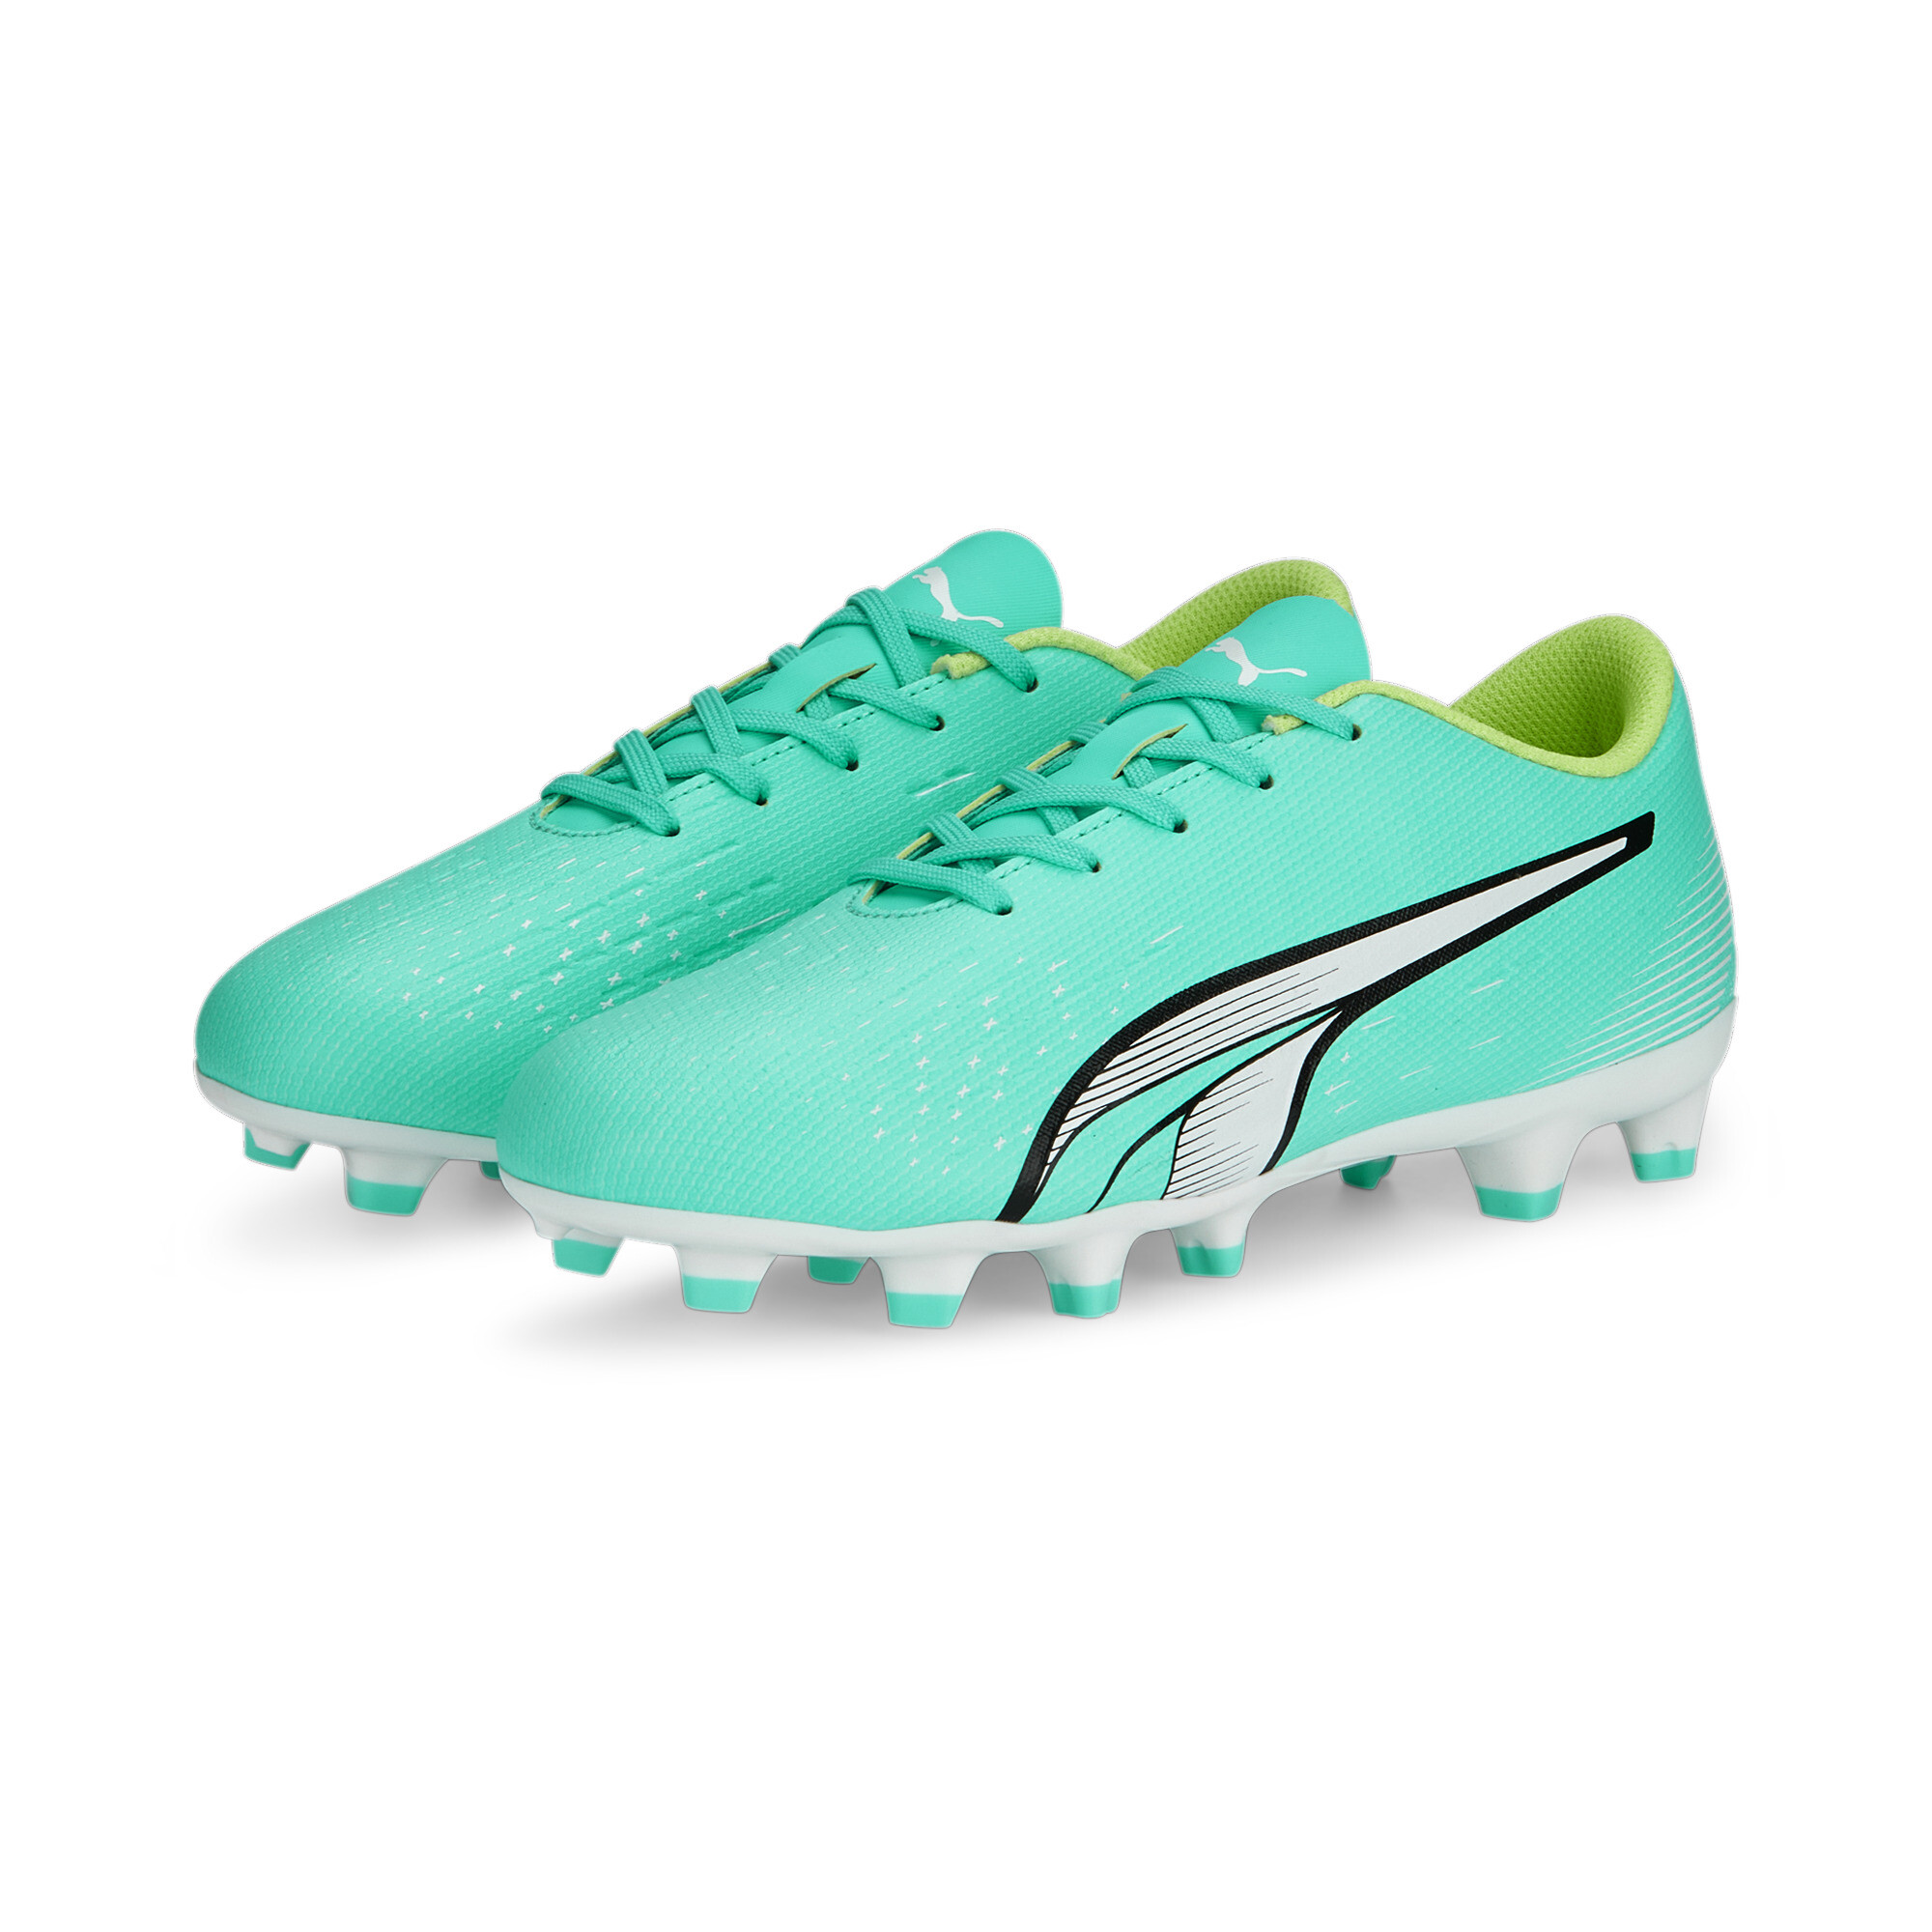 PUMA ULTRA Play FG/AG Football Boots Youth In 40 - Green, Size EU 27